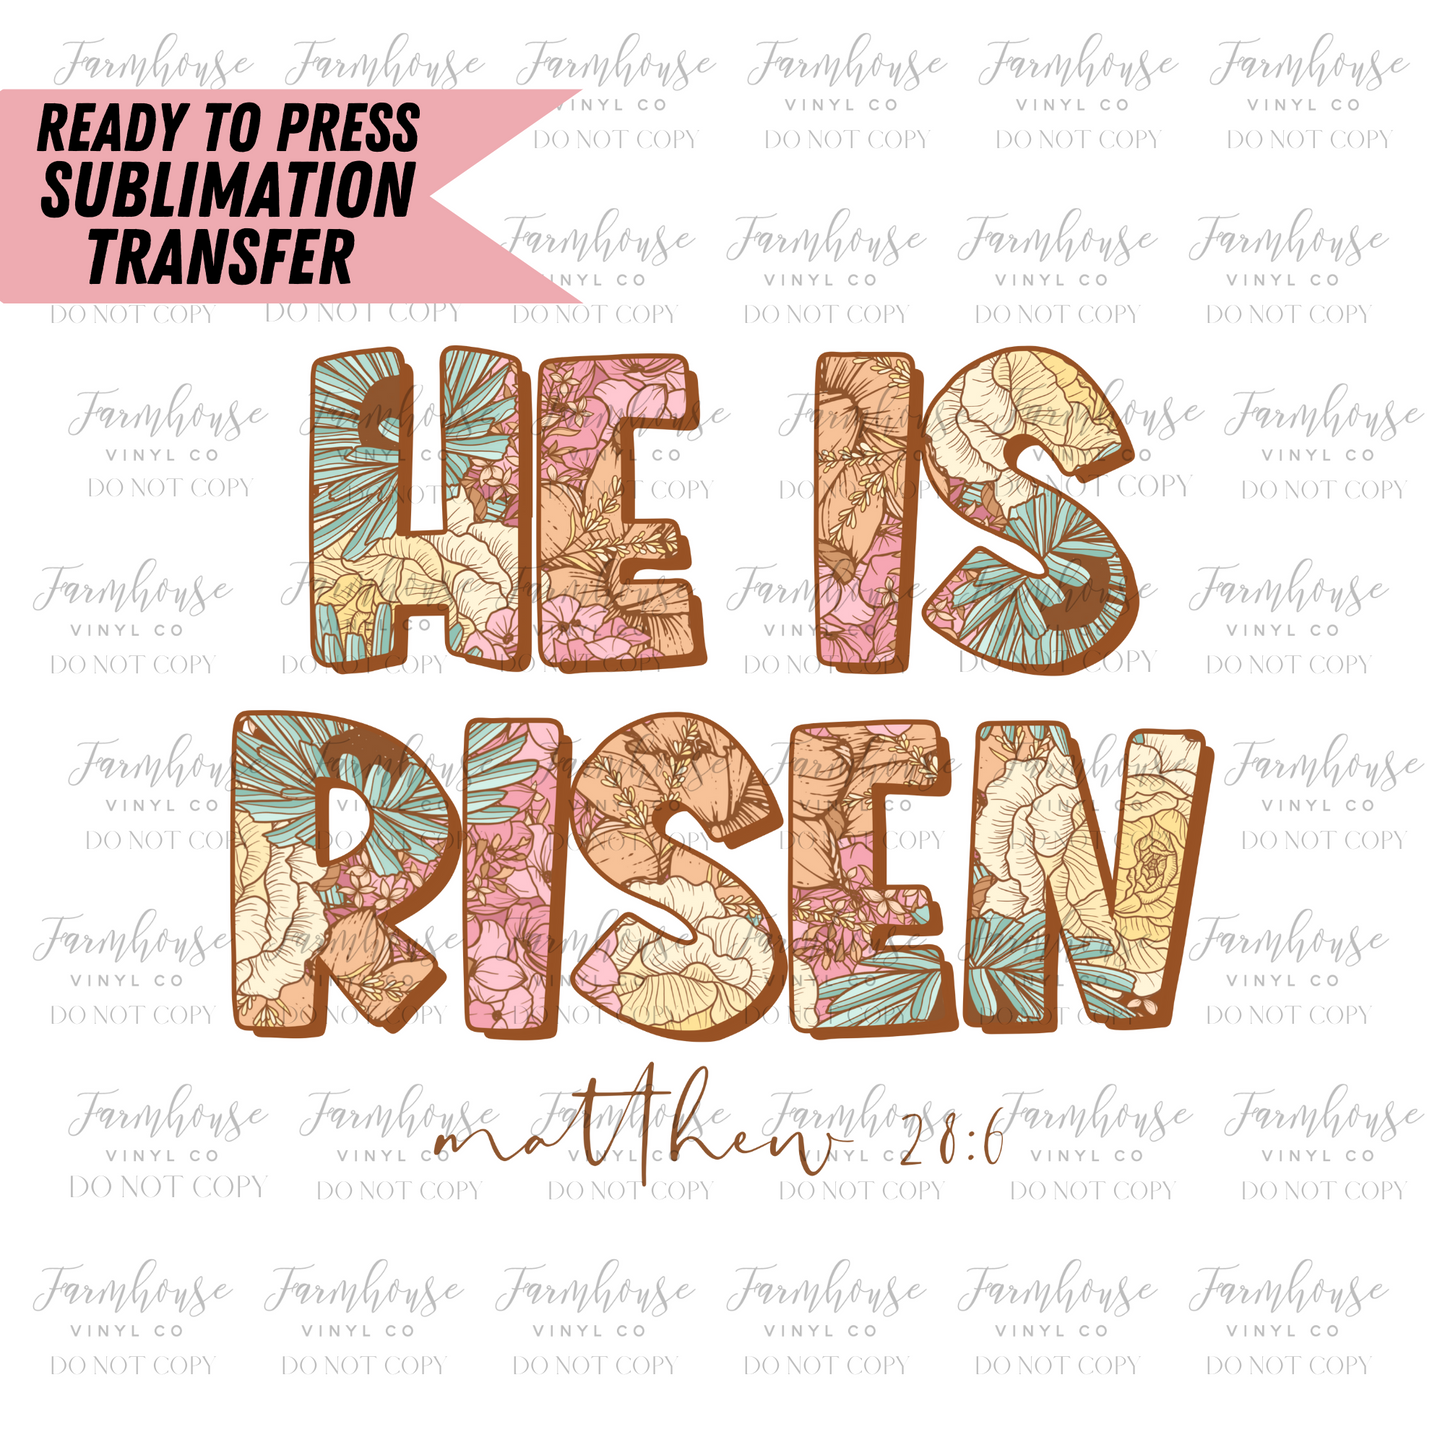 He Is Risen Matthew 28:6 Ready To Press Sublimation Transfer